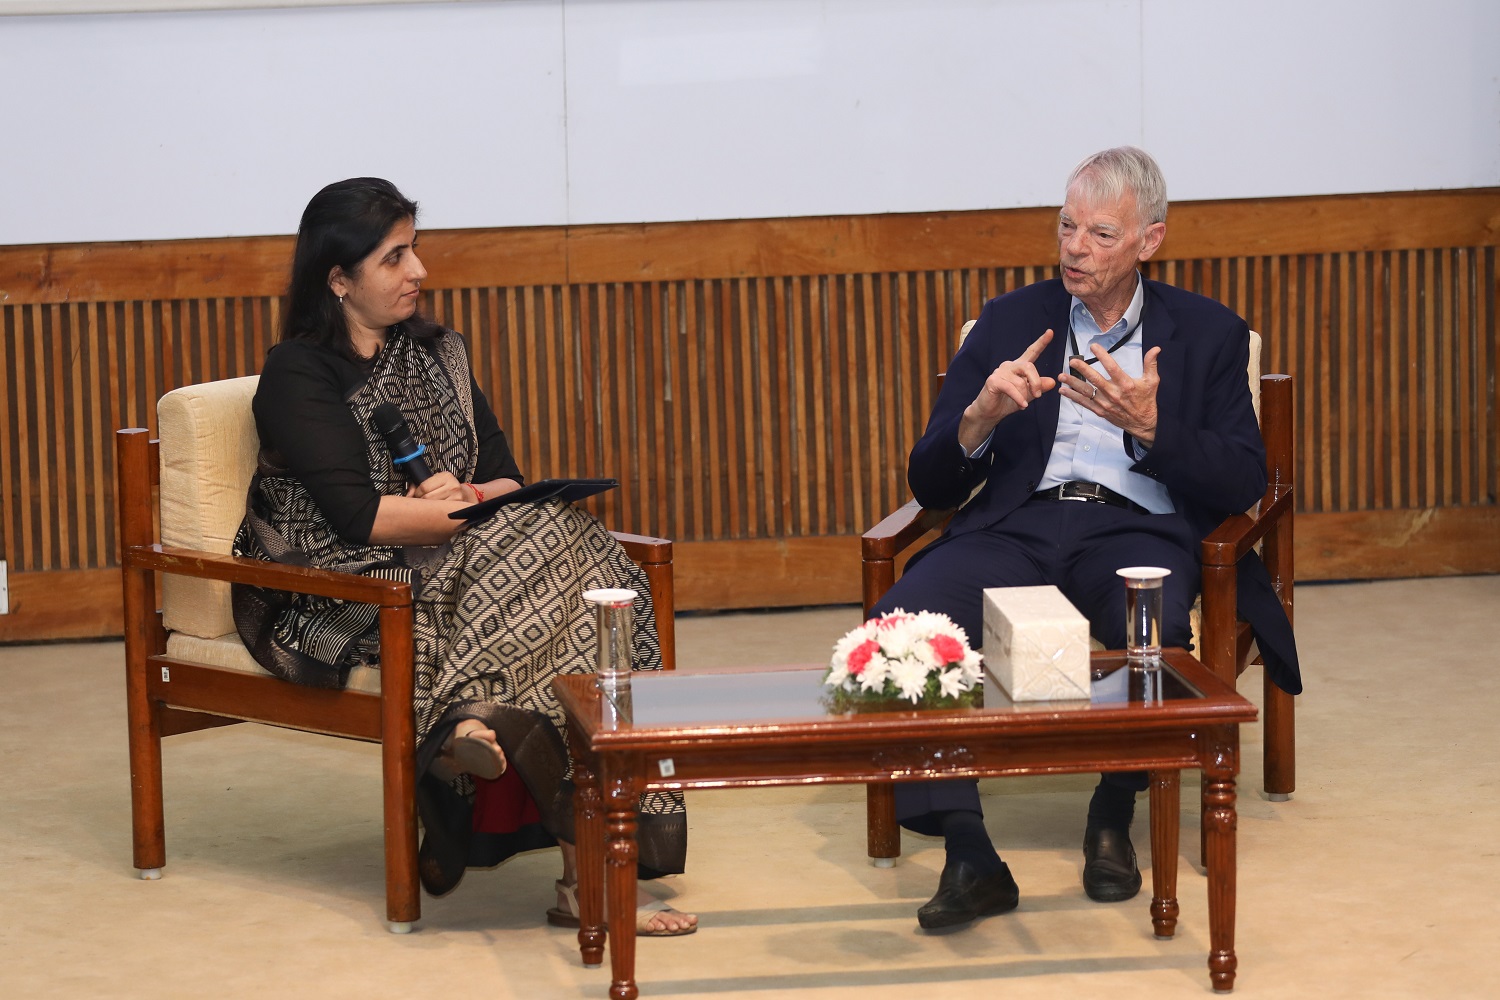 Prof. Manaswini Bhalla, faculty from the Economics area of IIM Bangalore, interacts with Nobel Laureate Prof. Michael Spence, Co-chair, Commission on Global Economic Transformation, Institute for New Economic Thinking (INET), during a fireside chat hosted by  the Economics area of IIM Bangalore on 15th February 2024. 